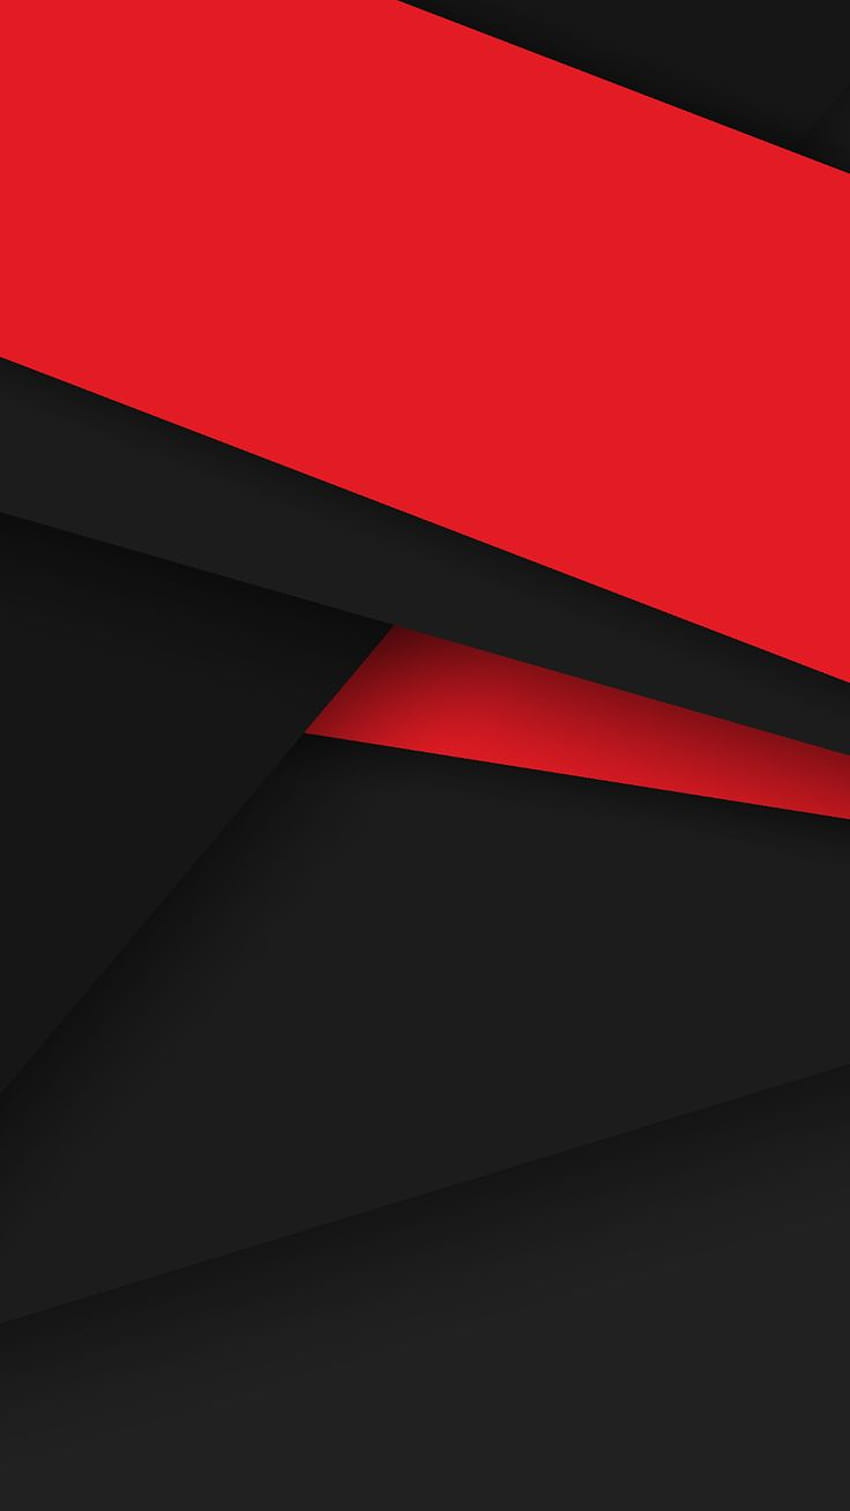 Gallery Red And Black Material Design Mobile . Red And Black , Black ...